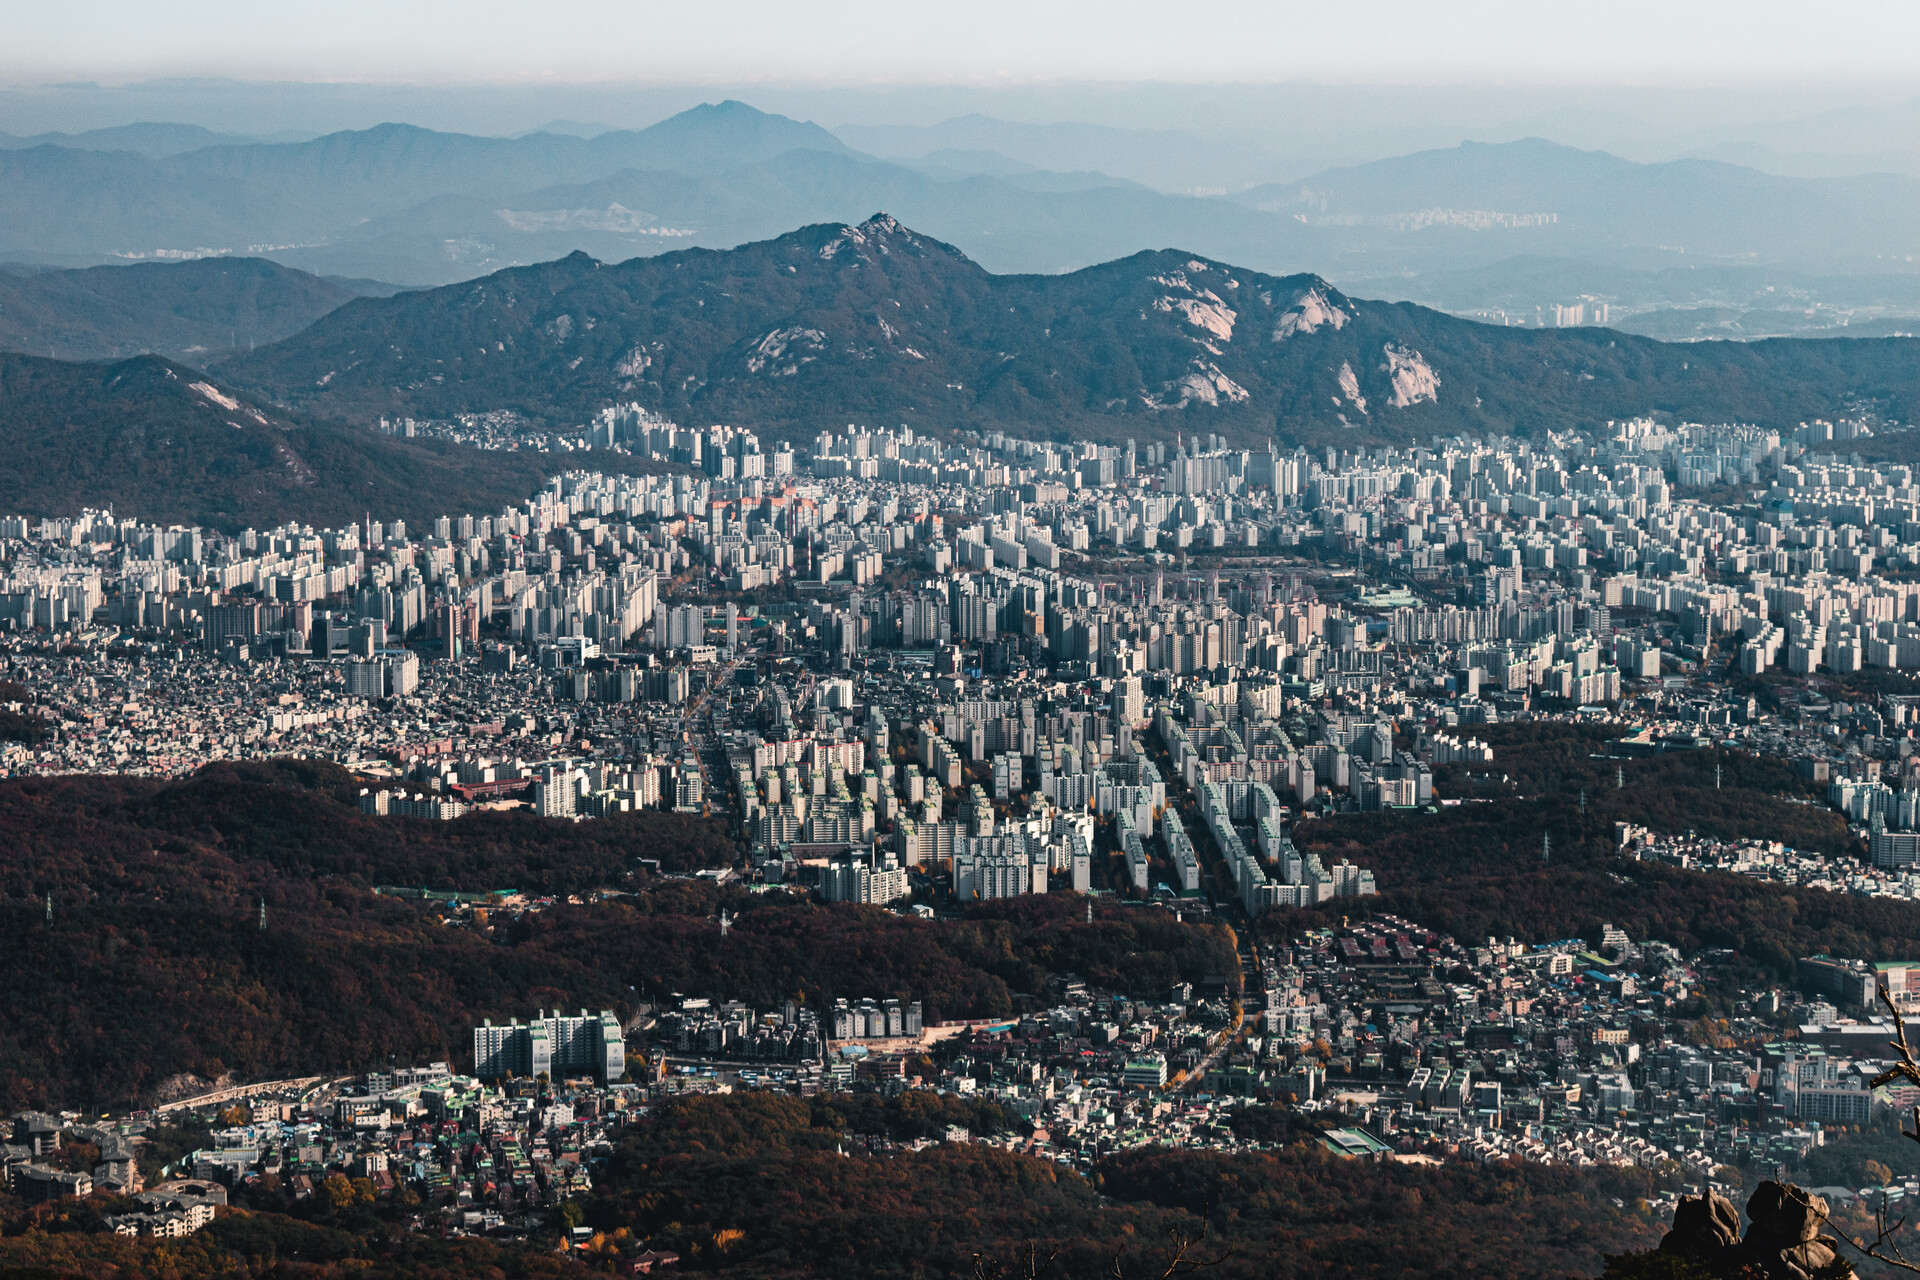 A part of Seoul from the Bukhansan mountain. What a view! And what a hike. (800+ meters)